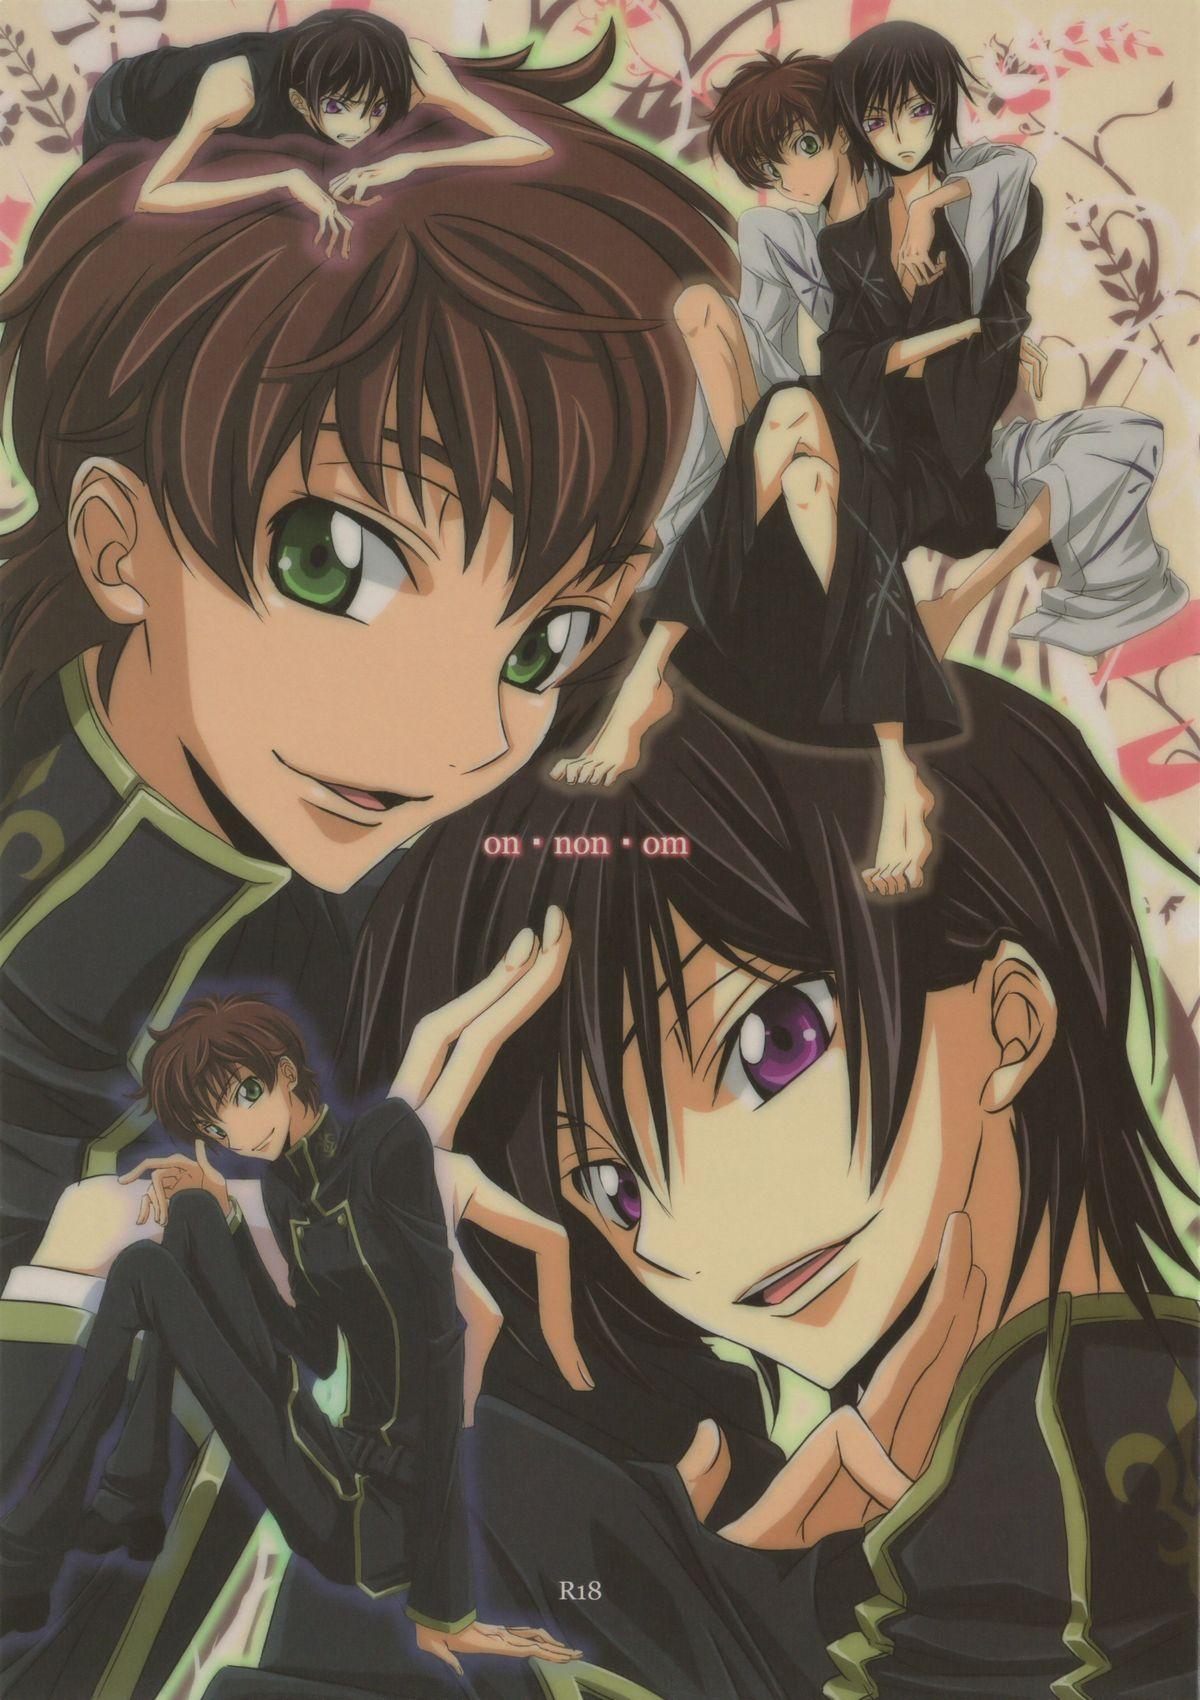 Stripping on・non・om - Code geass Casa - Picture 1